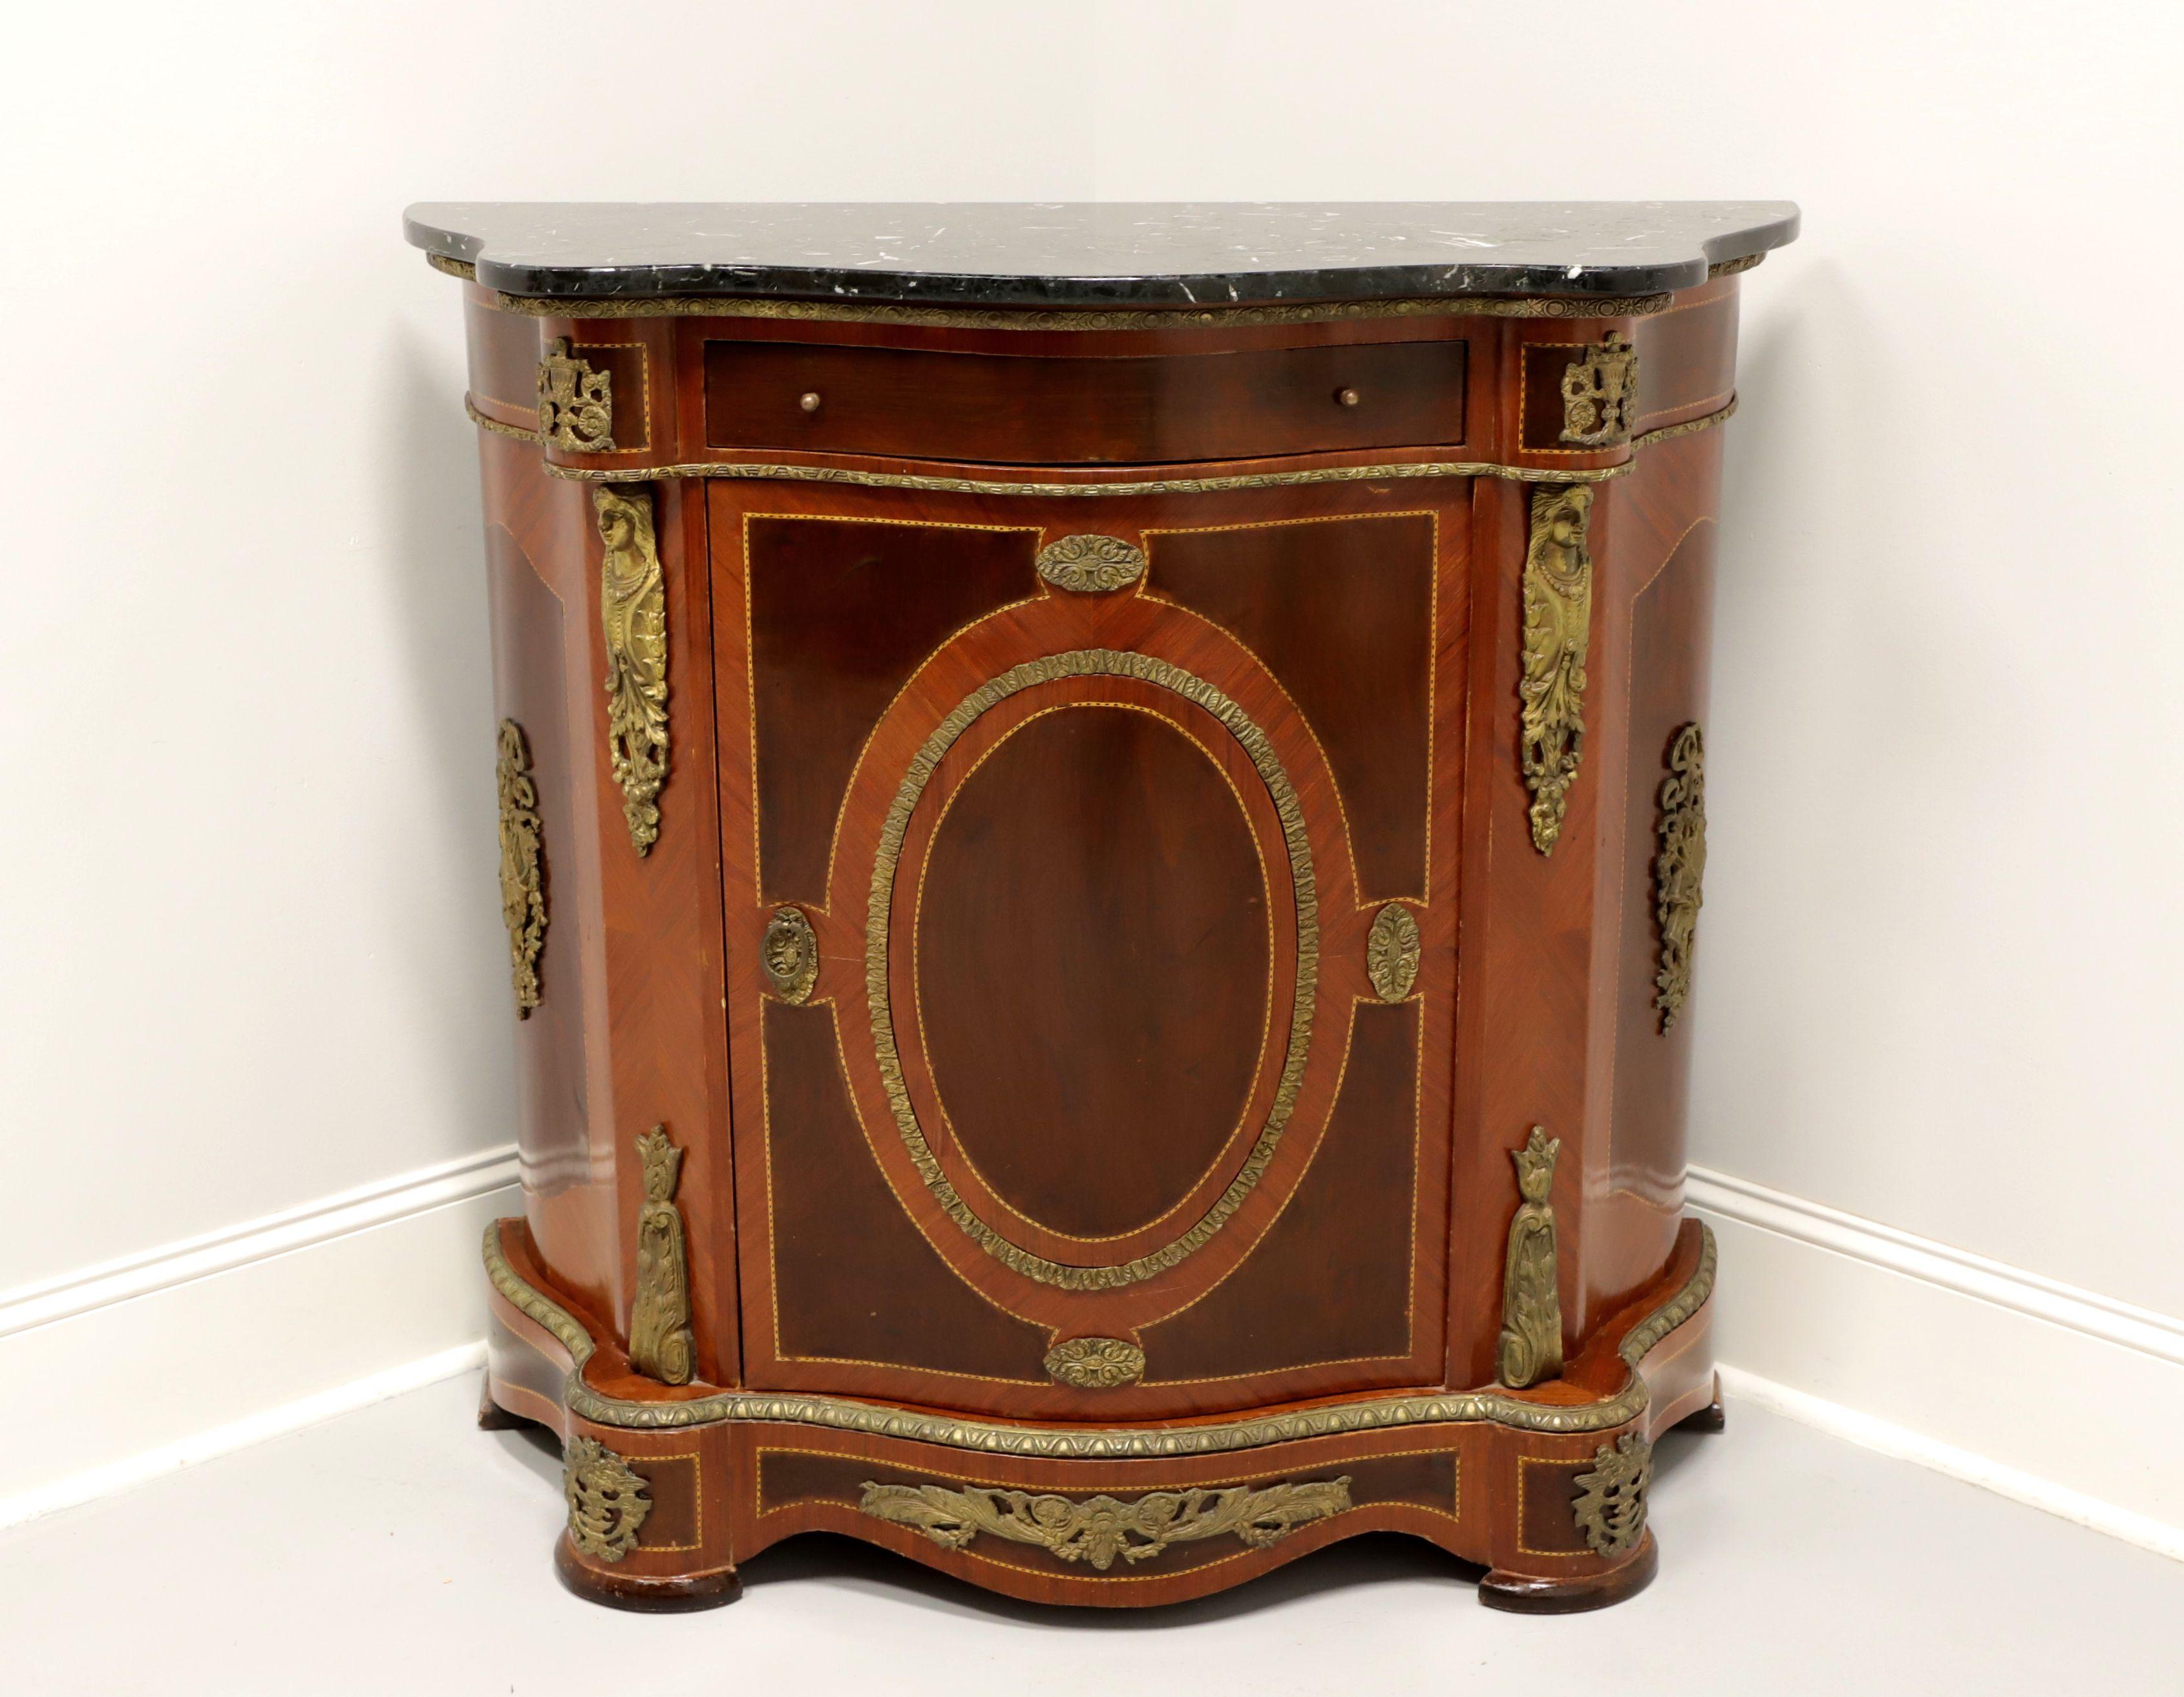 An antique marble top console cabinet in the Italian Neoclassical style, unbranded. Mahogany and veneers, marble top, marquetry designs and brass ormolu mounts. Features one drawer over a lower one door cabinet revealing interior storage with one